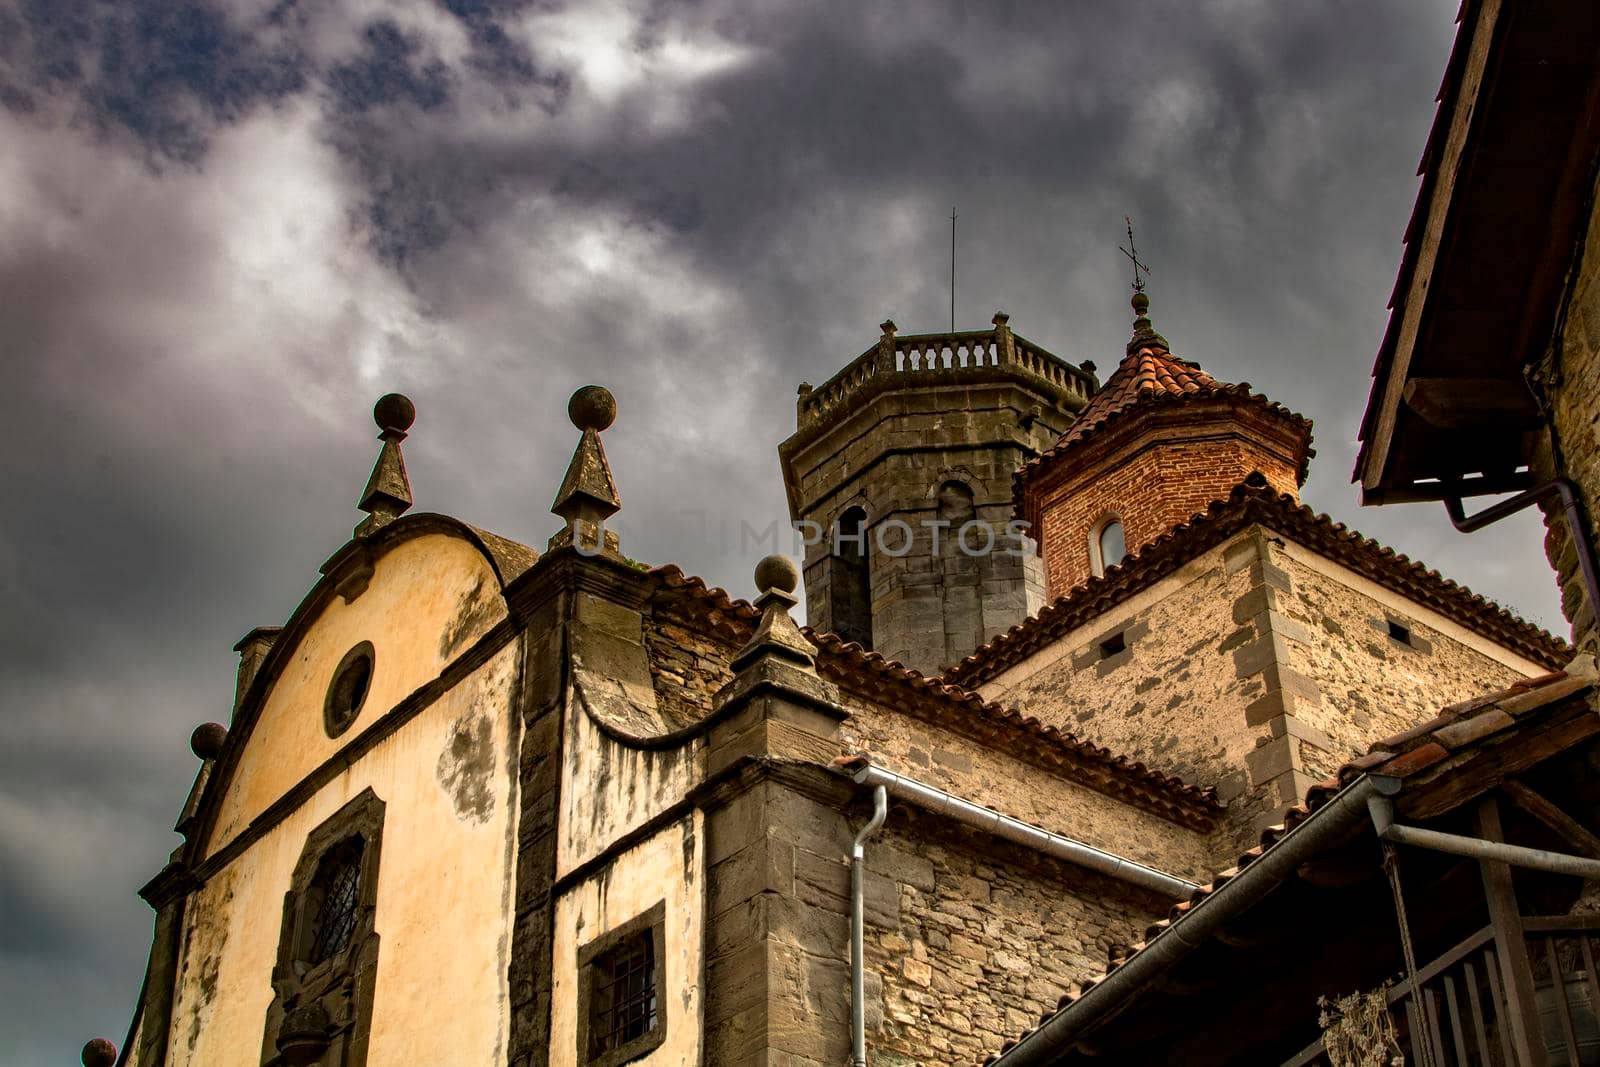 Church facade and towers in a Catalan town called Rupit under a cloudy sky